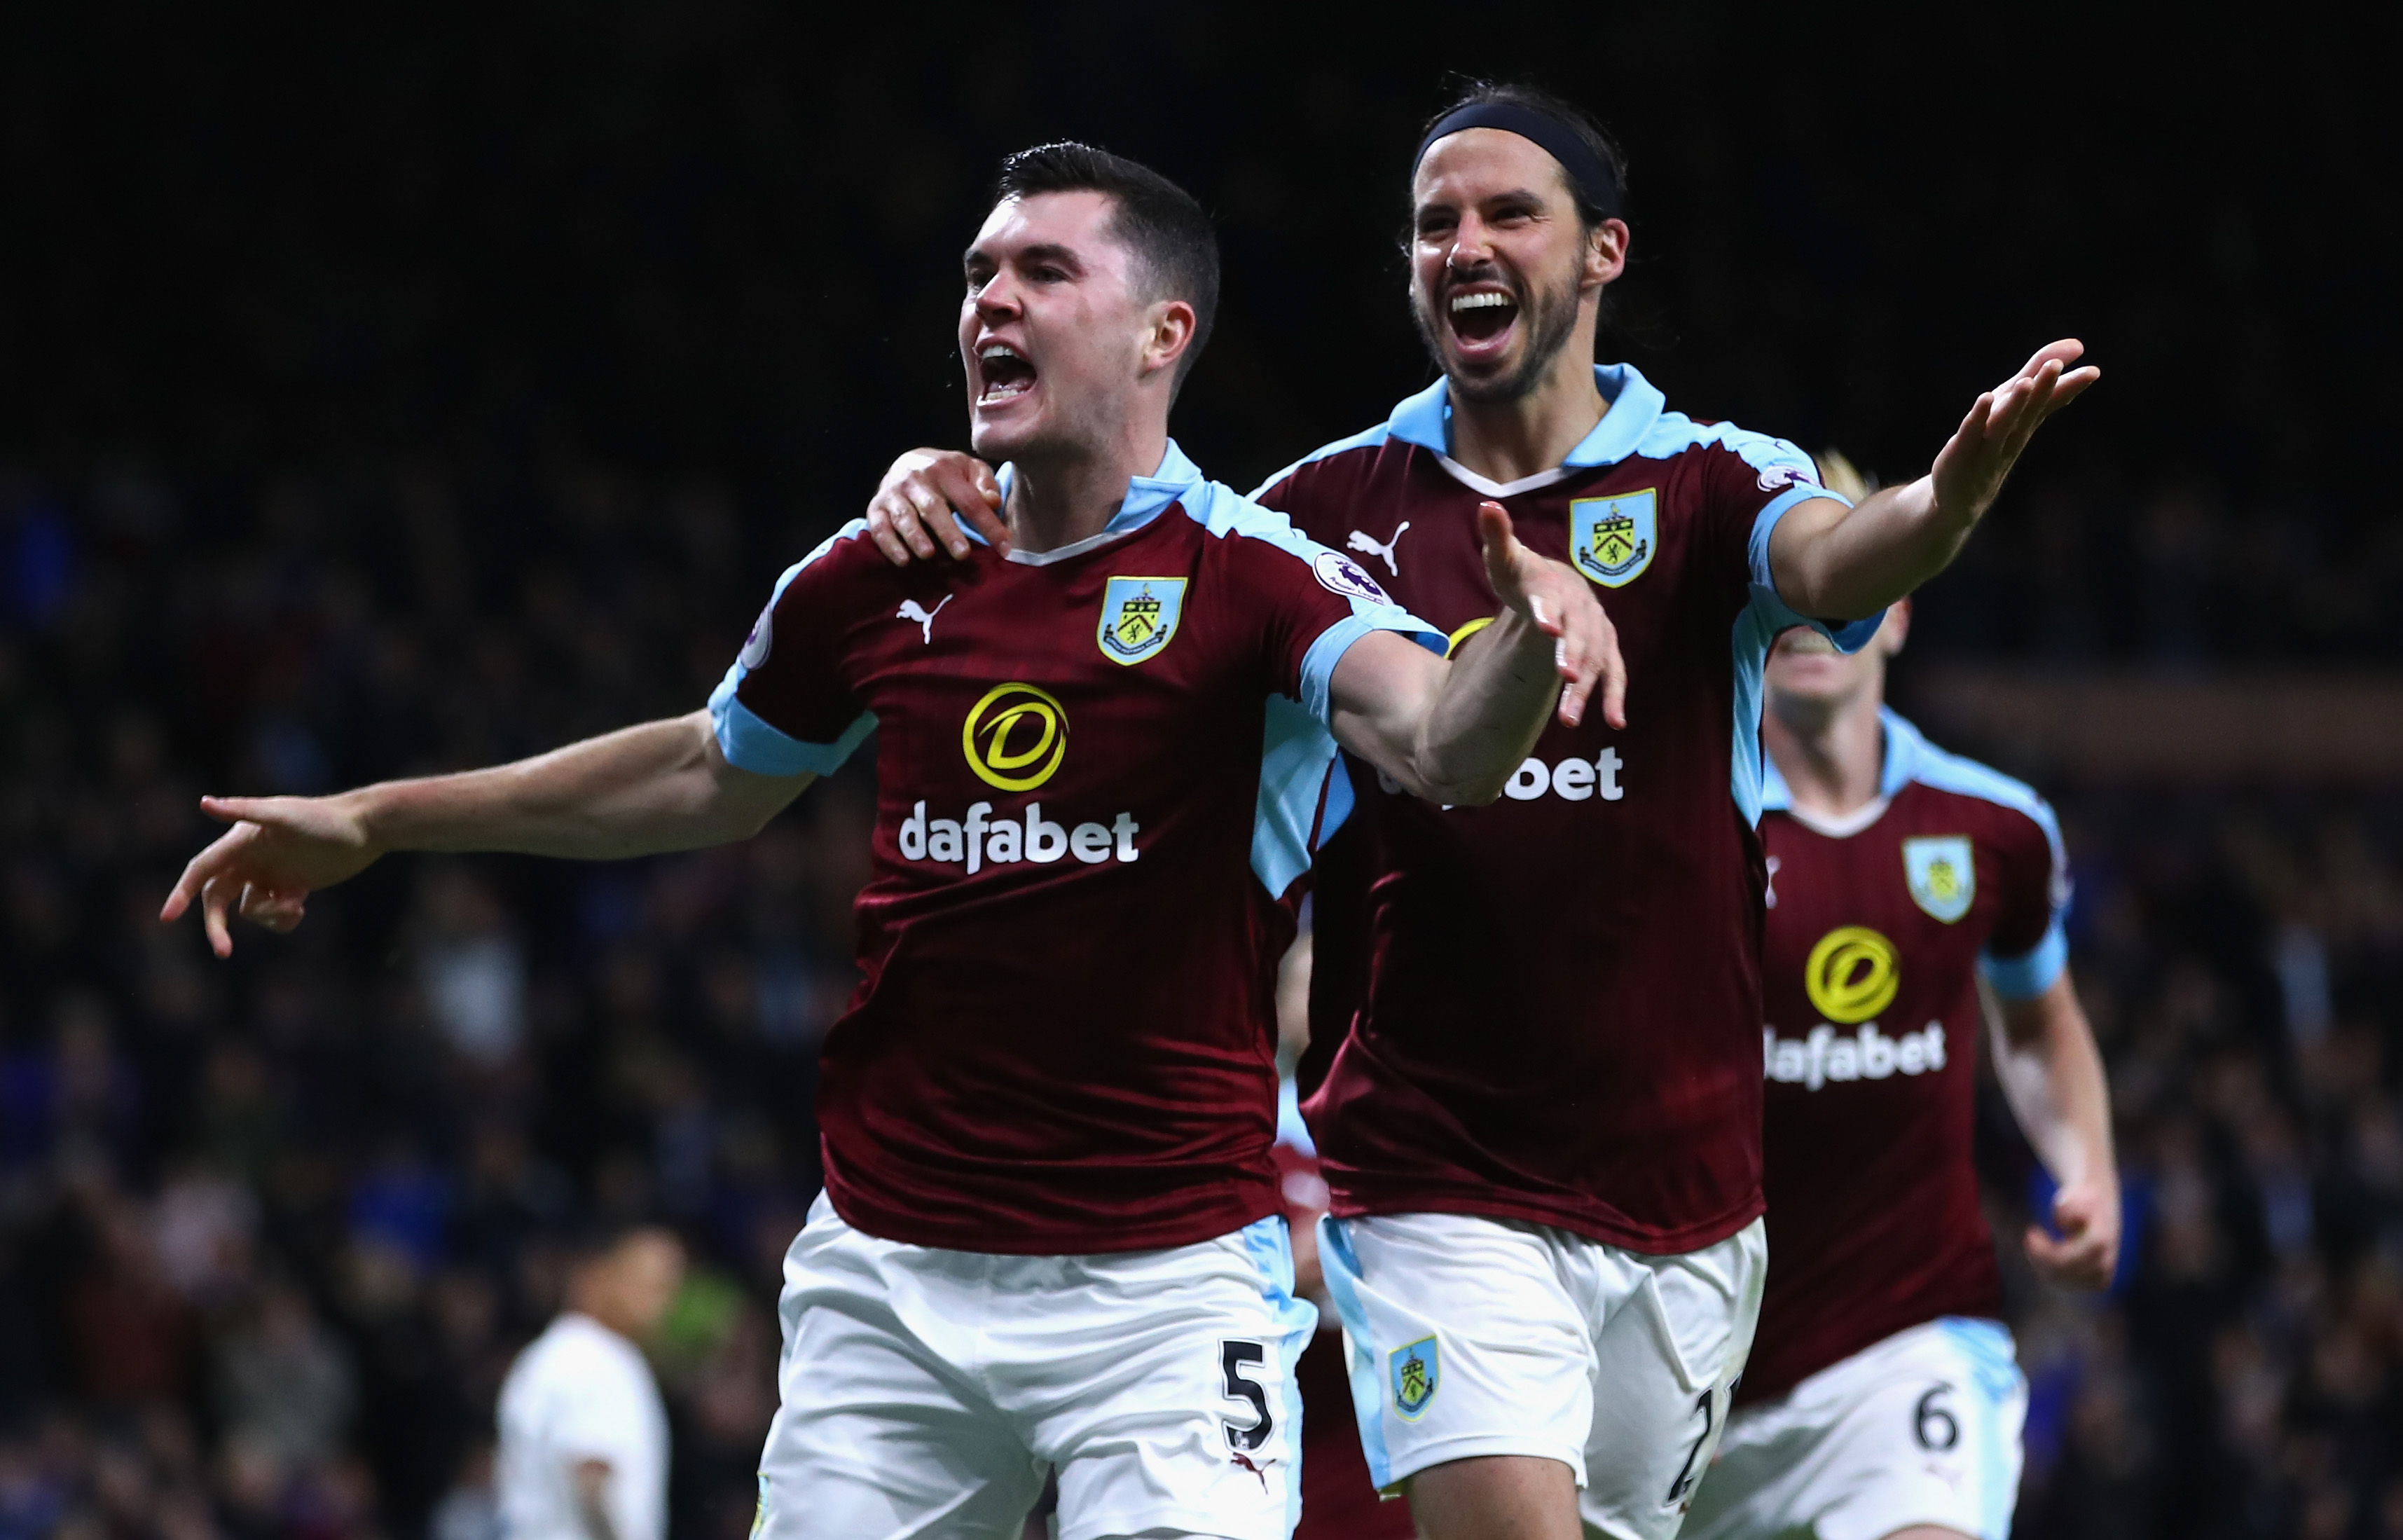 BURNLEY, ENGLAND - SEPTEMBER 26:  Michael Keane of Burnley (L) celebrates scoring his sides second goal with team George Boyd of Burnley (R) during the Premier League match between Burnley and Watford at Turf Moor on September 26, 2016 in Burnley, England.  (Photo by Clive Brunskill/Getty Images)